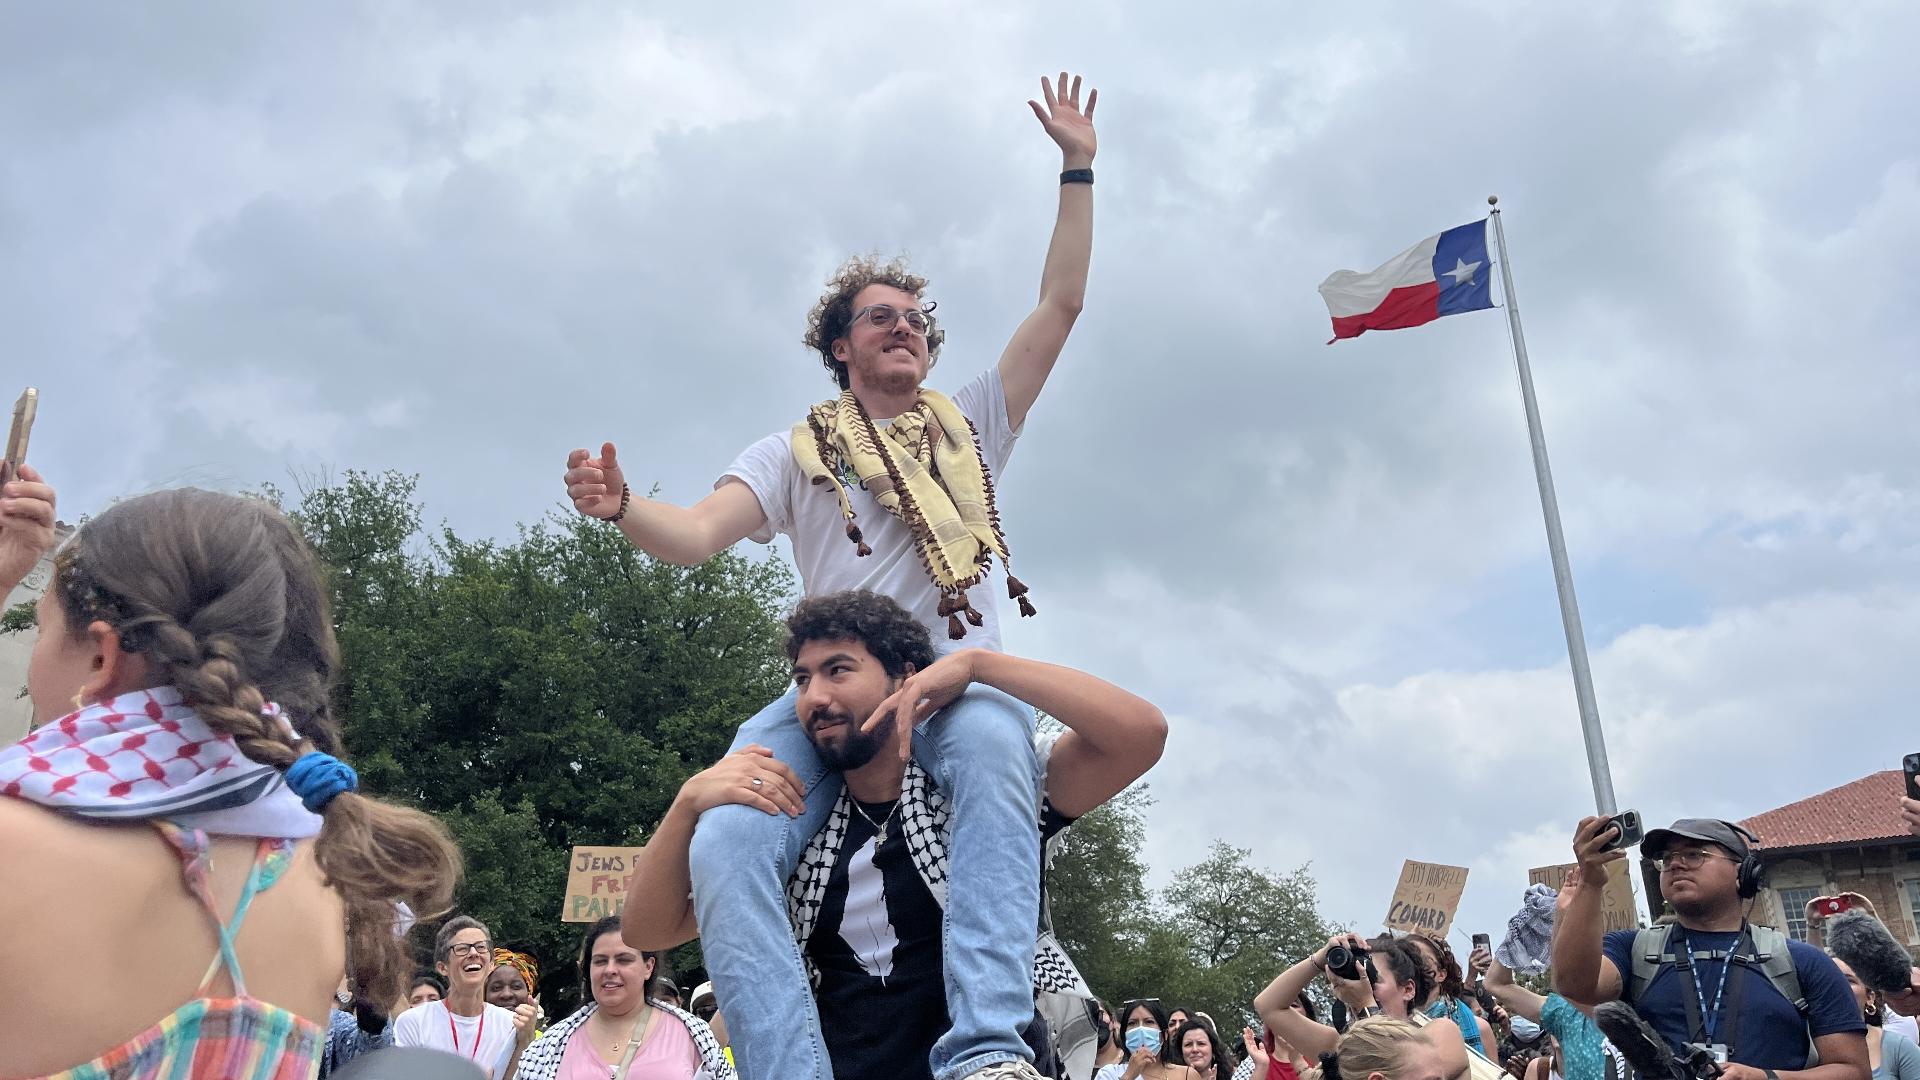 University of Texas administrators say the Palestine Solidarity Committee, which organized Wednesday's protest, is suspended for violating university rules.